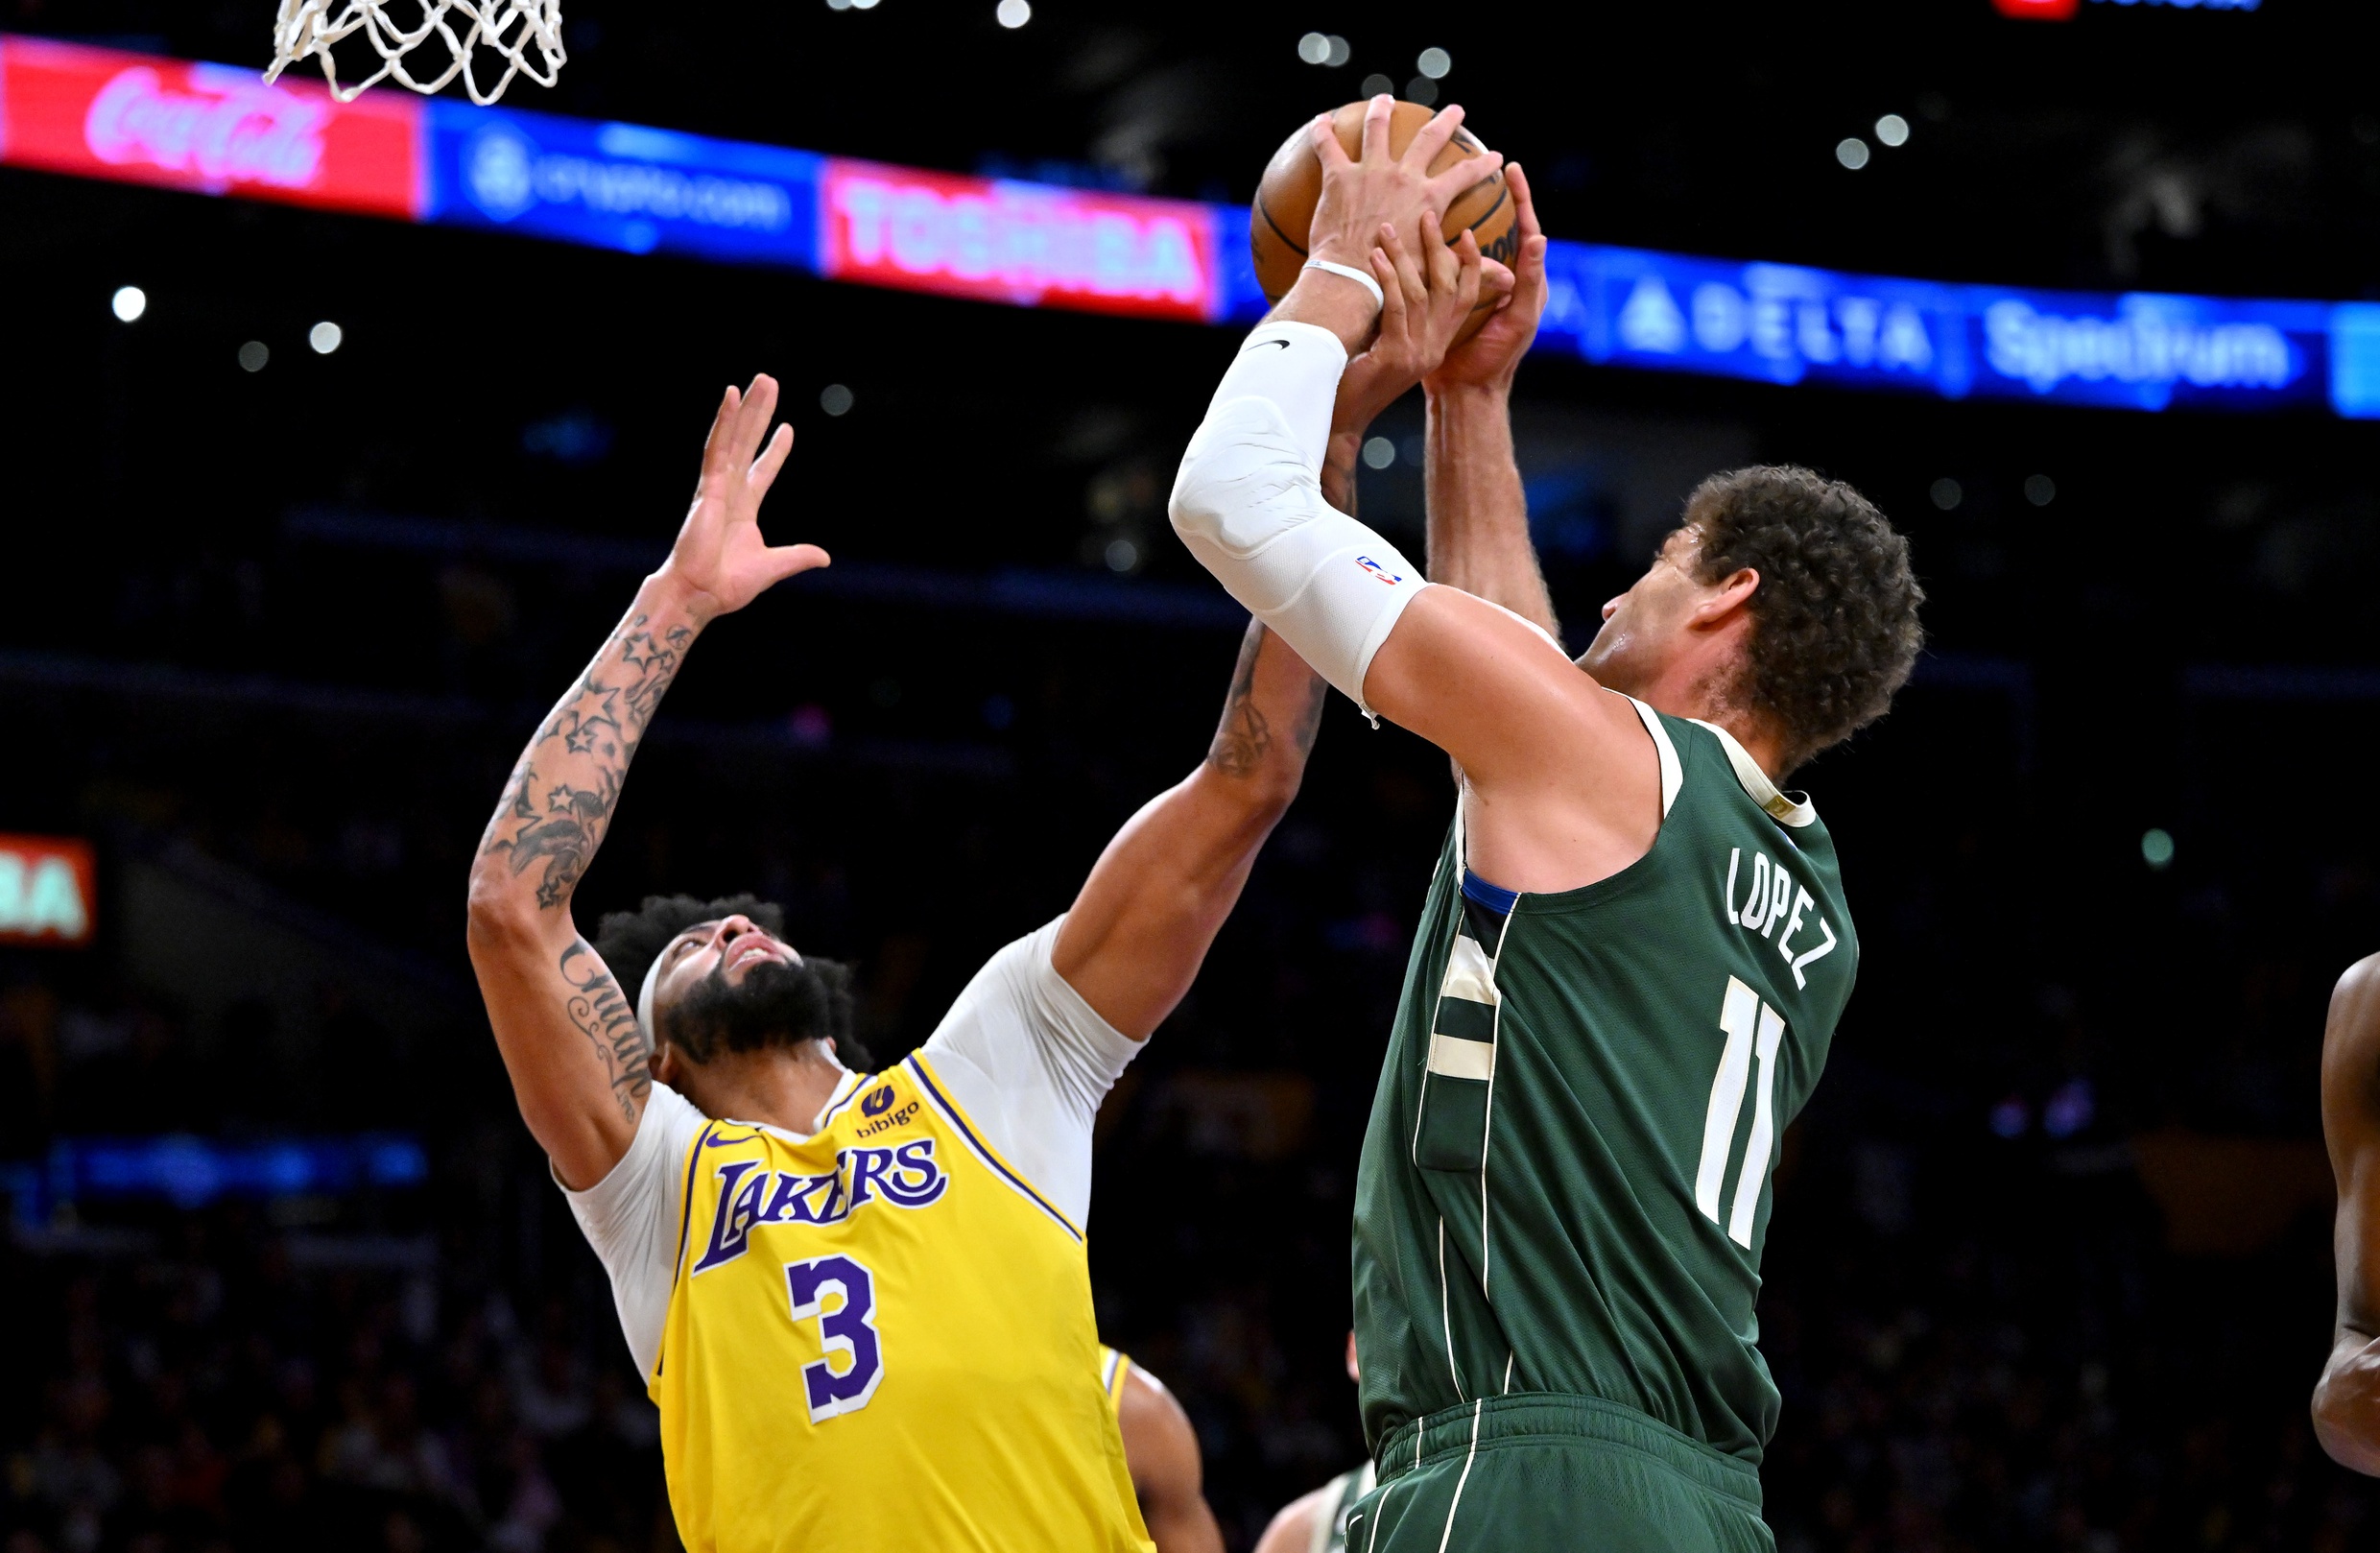 Milwaukee Bucks center Brook Lopez had 9 points and 10 rebounds against the Lakers (NBA Rumors)